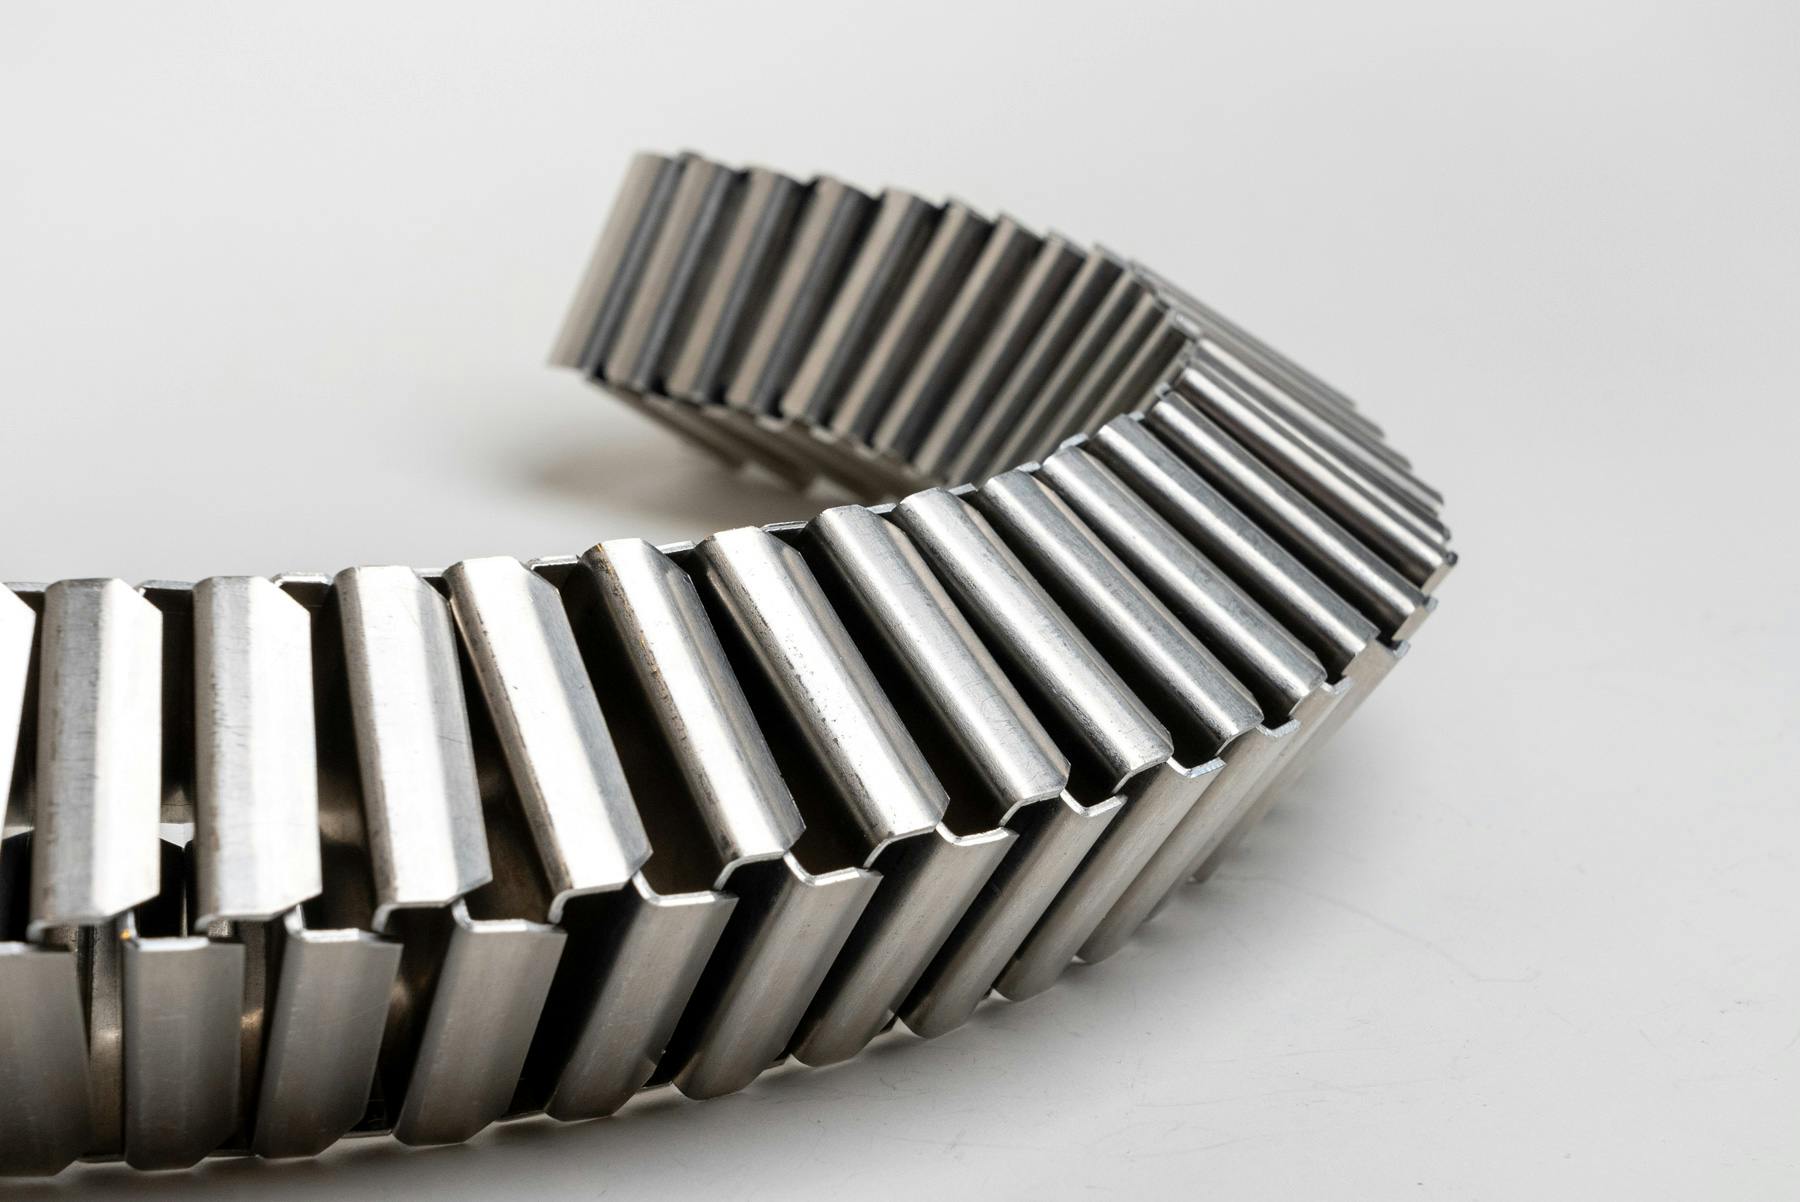 A long string of modular C-shaped clips made from aluminum sheets, each clipping onto the next in an alternating sequence. 